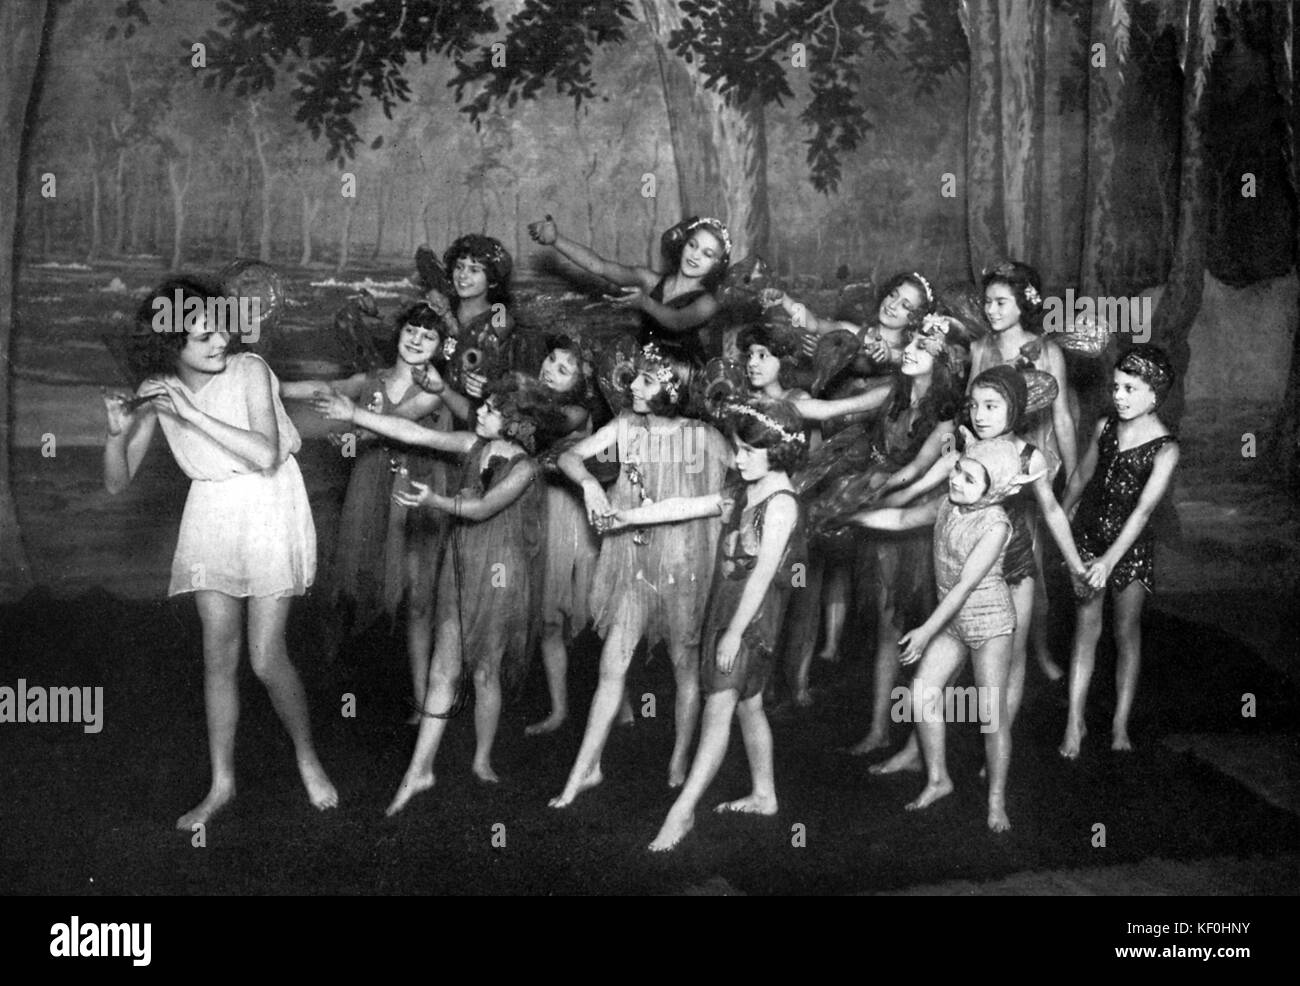 'Where the Rainbow Ends' by Clifford Mills and John Ramsey. 'Come with me into the woods, come and join our fairy ring.' A London production at the Holborn Empire Theatre, 1932. Stock Photo